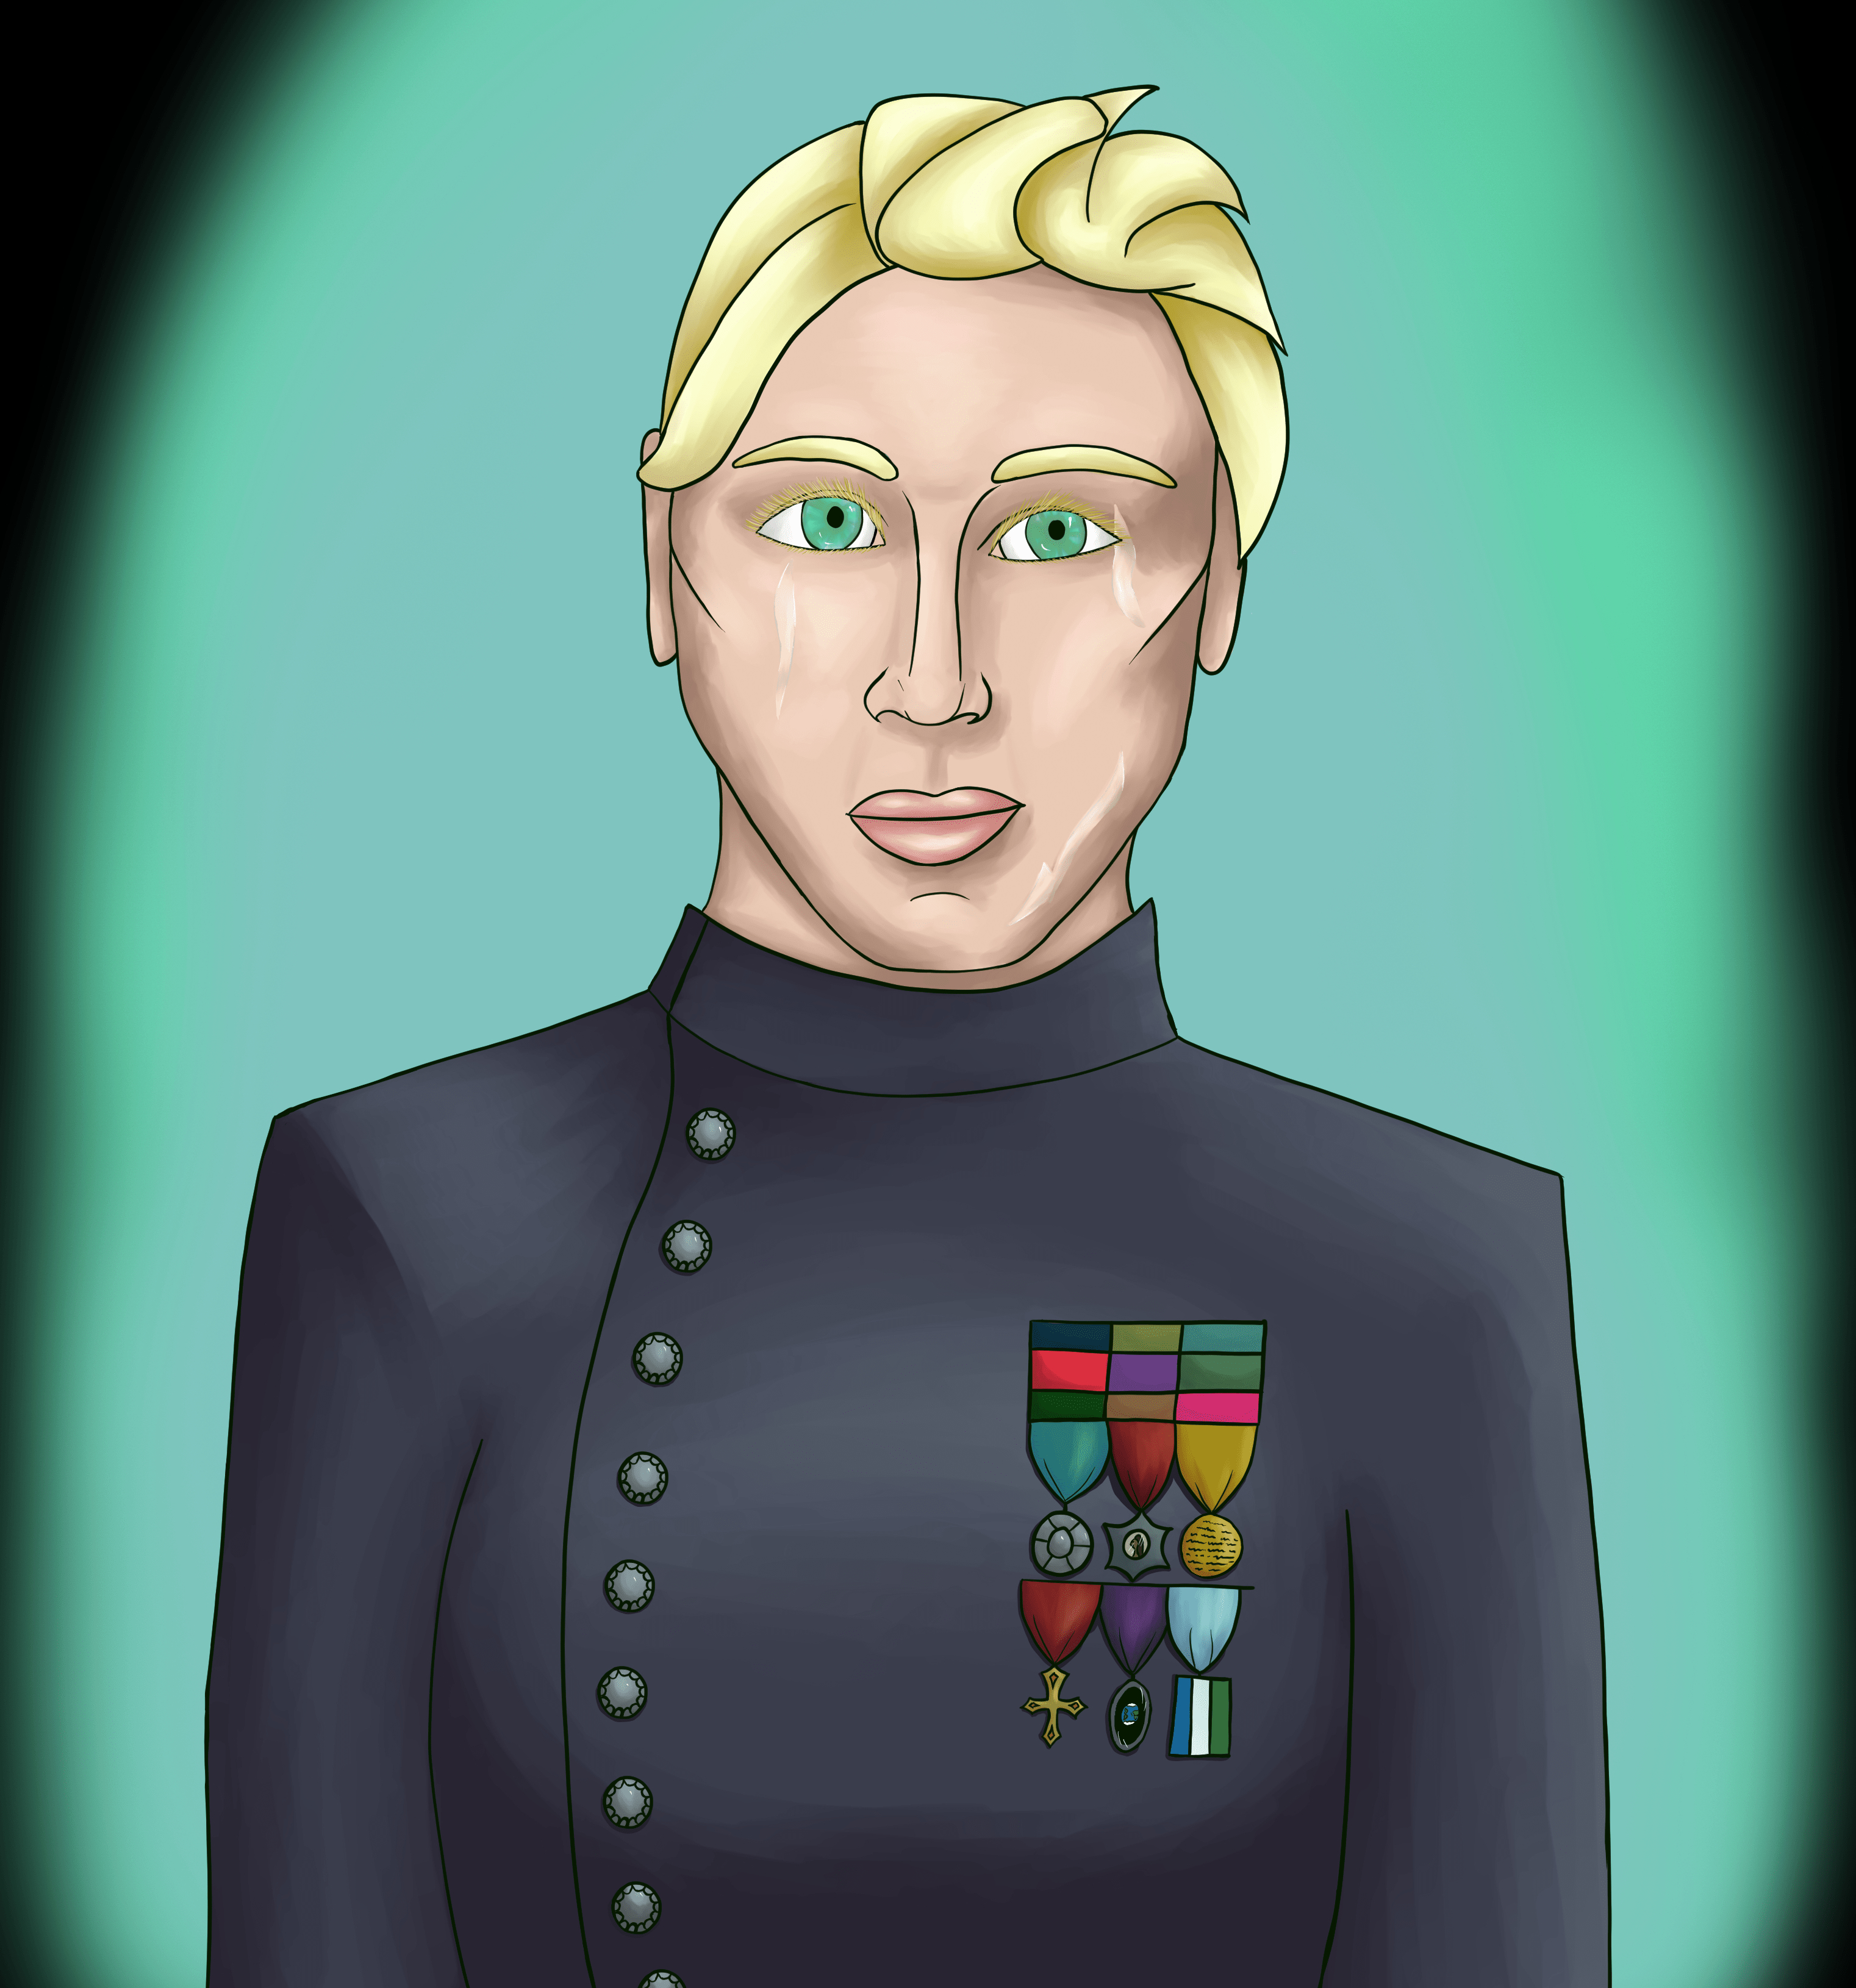 Digitally painted portrait of Pippa Banks, a stern looking blonde woman with short hair wearing a military uniform with a plethora of medals on her chest.